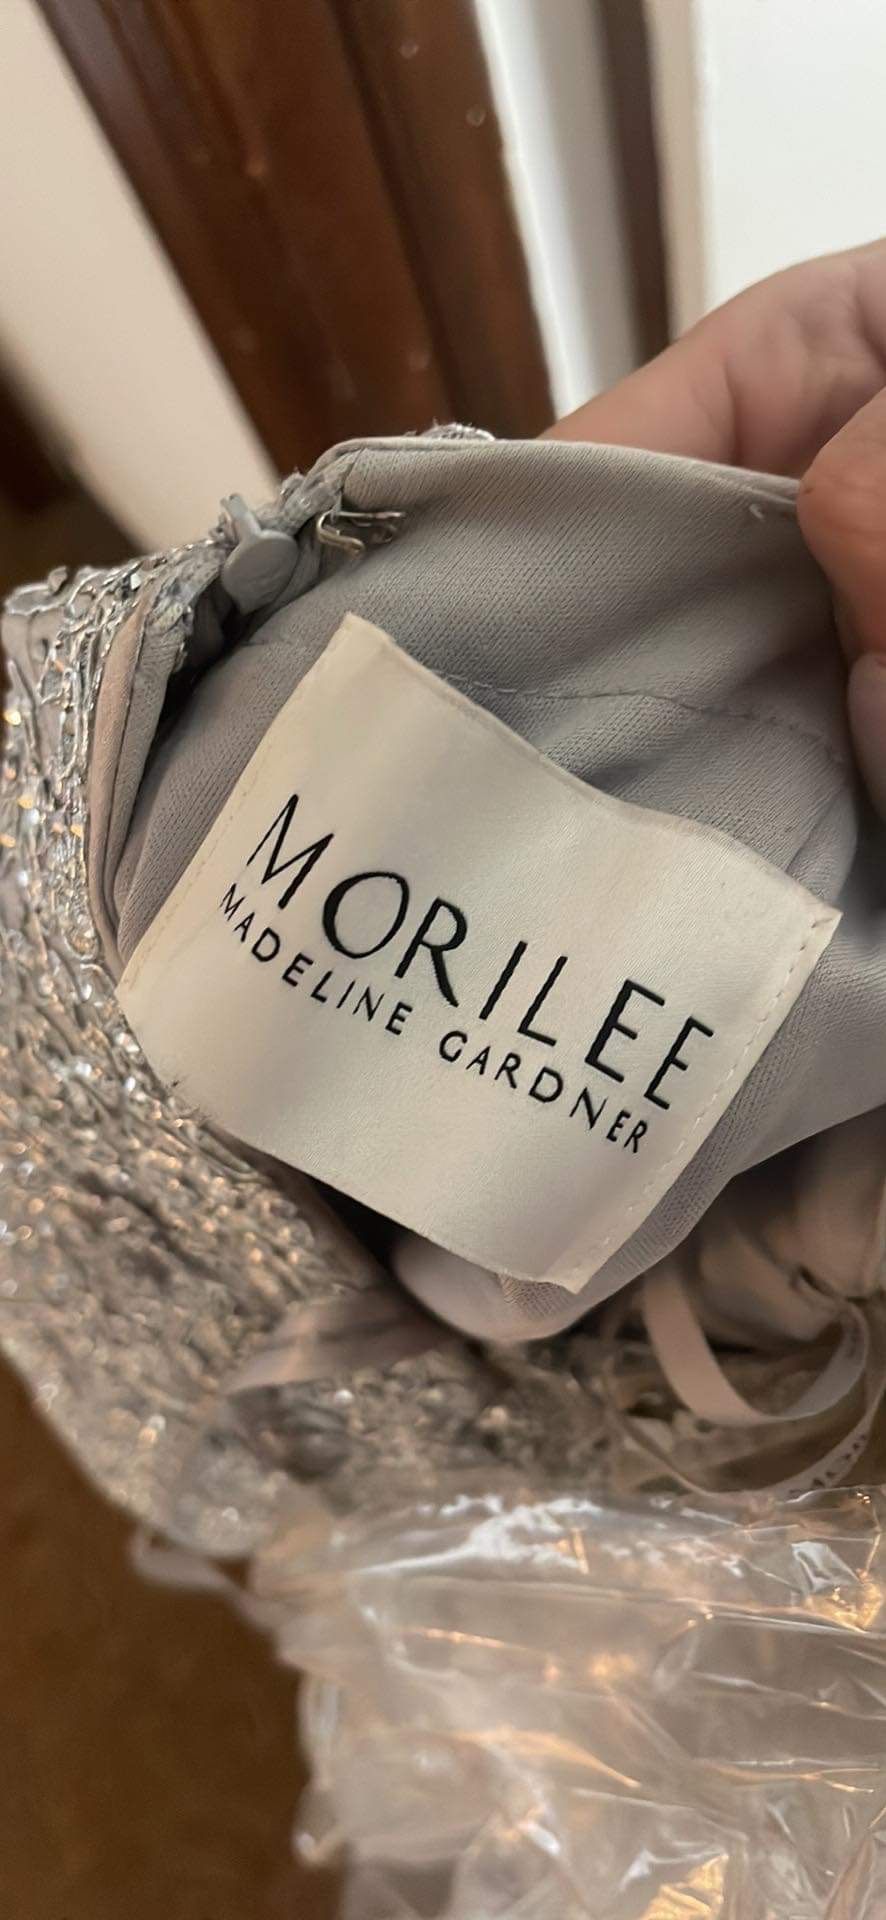 morilee Size M Prom Silver Ball Gown on Queenly